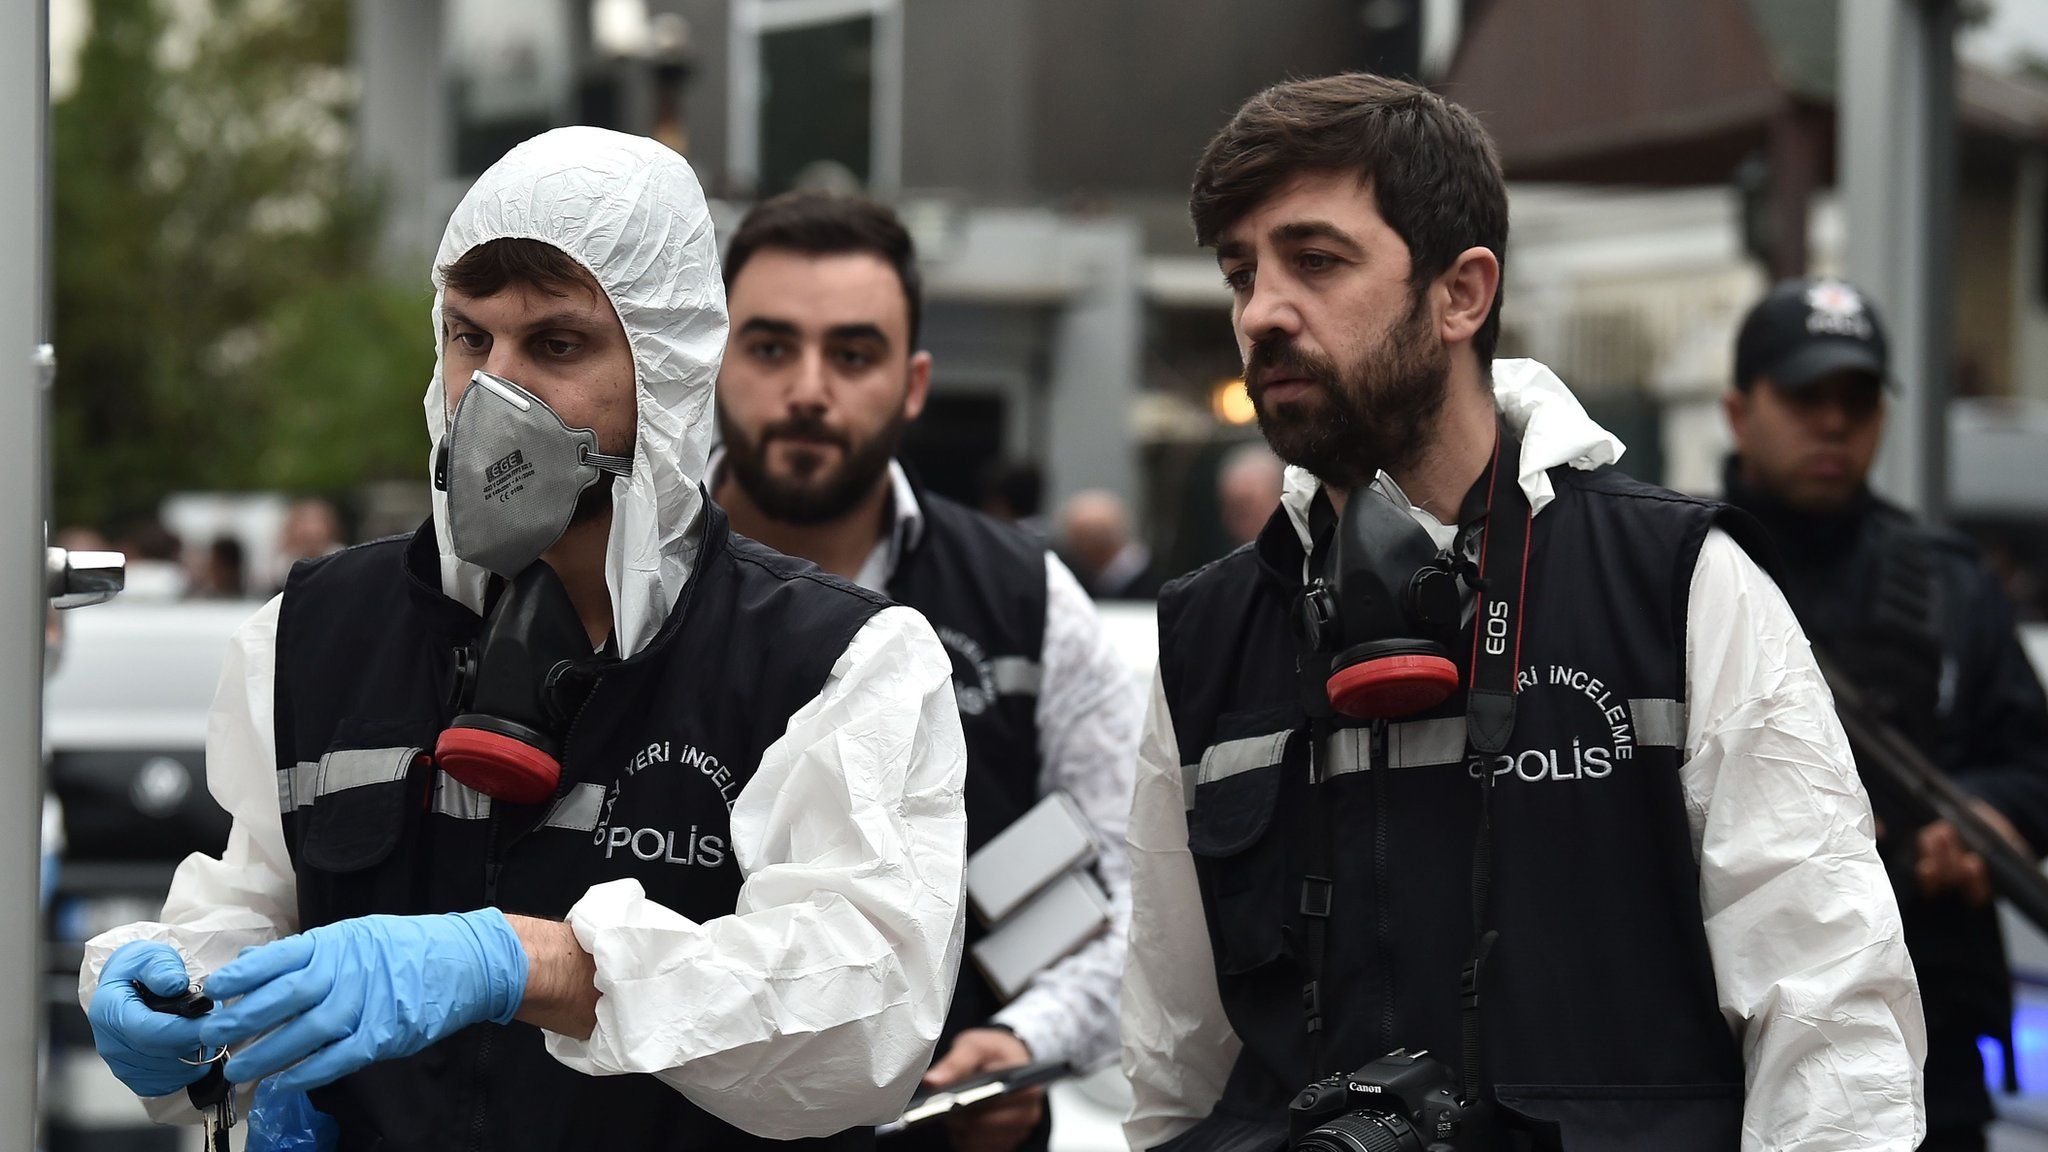 Turkish forensic investigators arriving at the Saudi consul's residence in Istanbul, 17 Oct